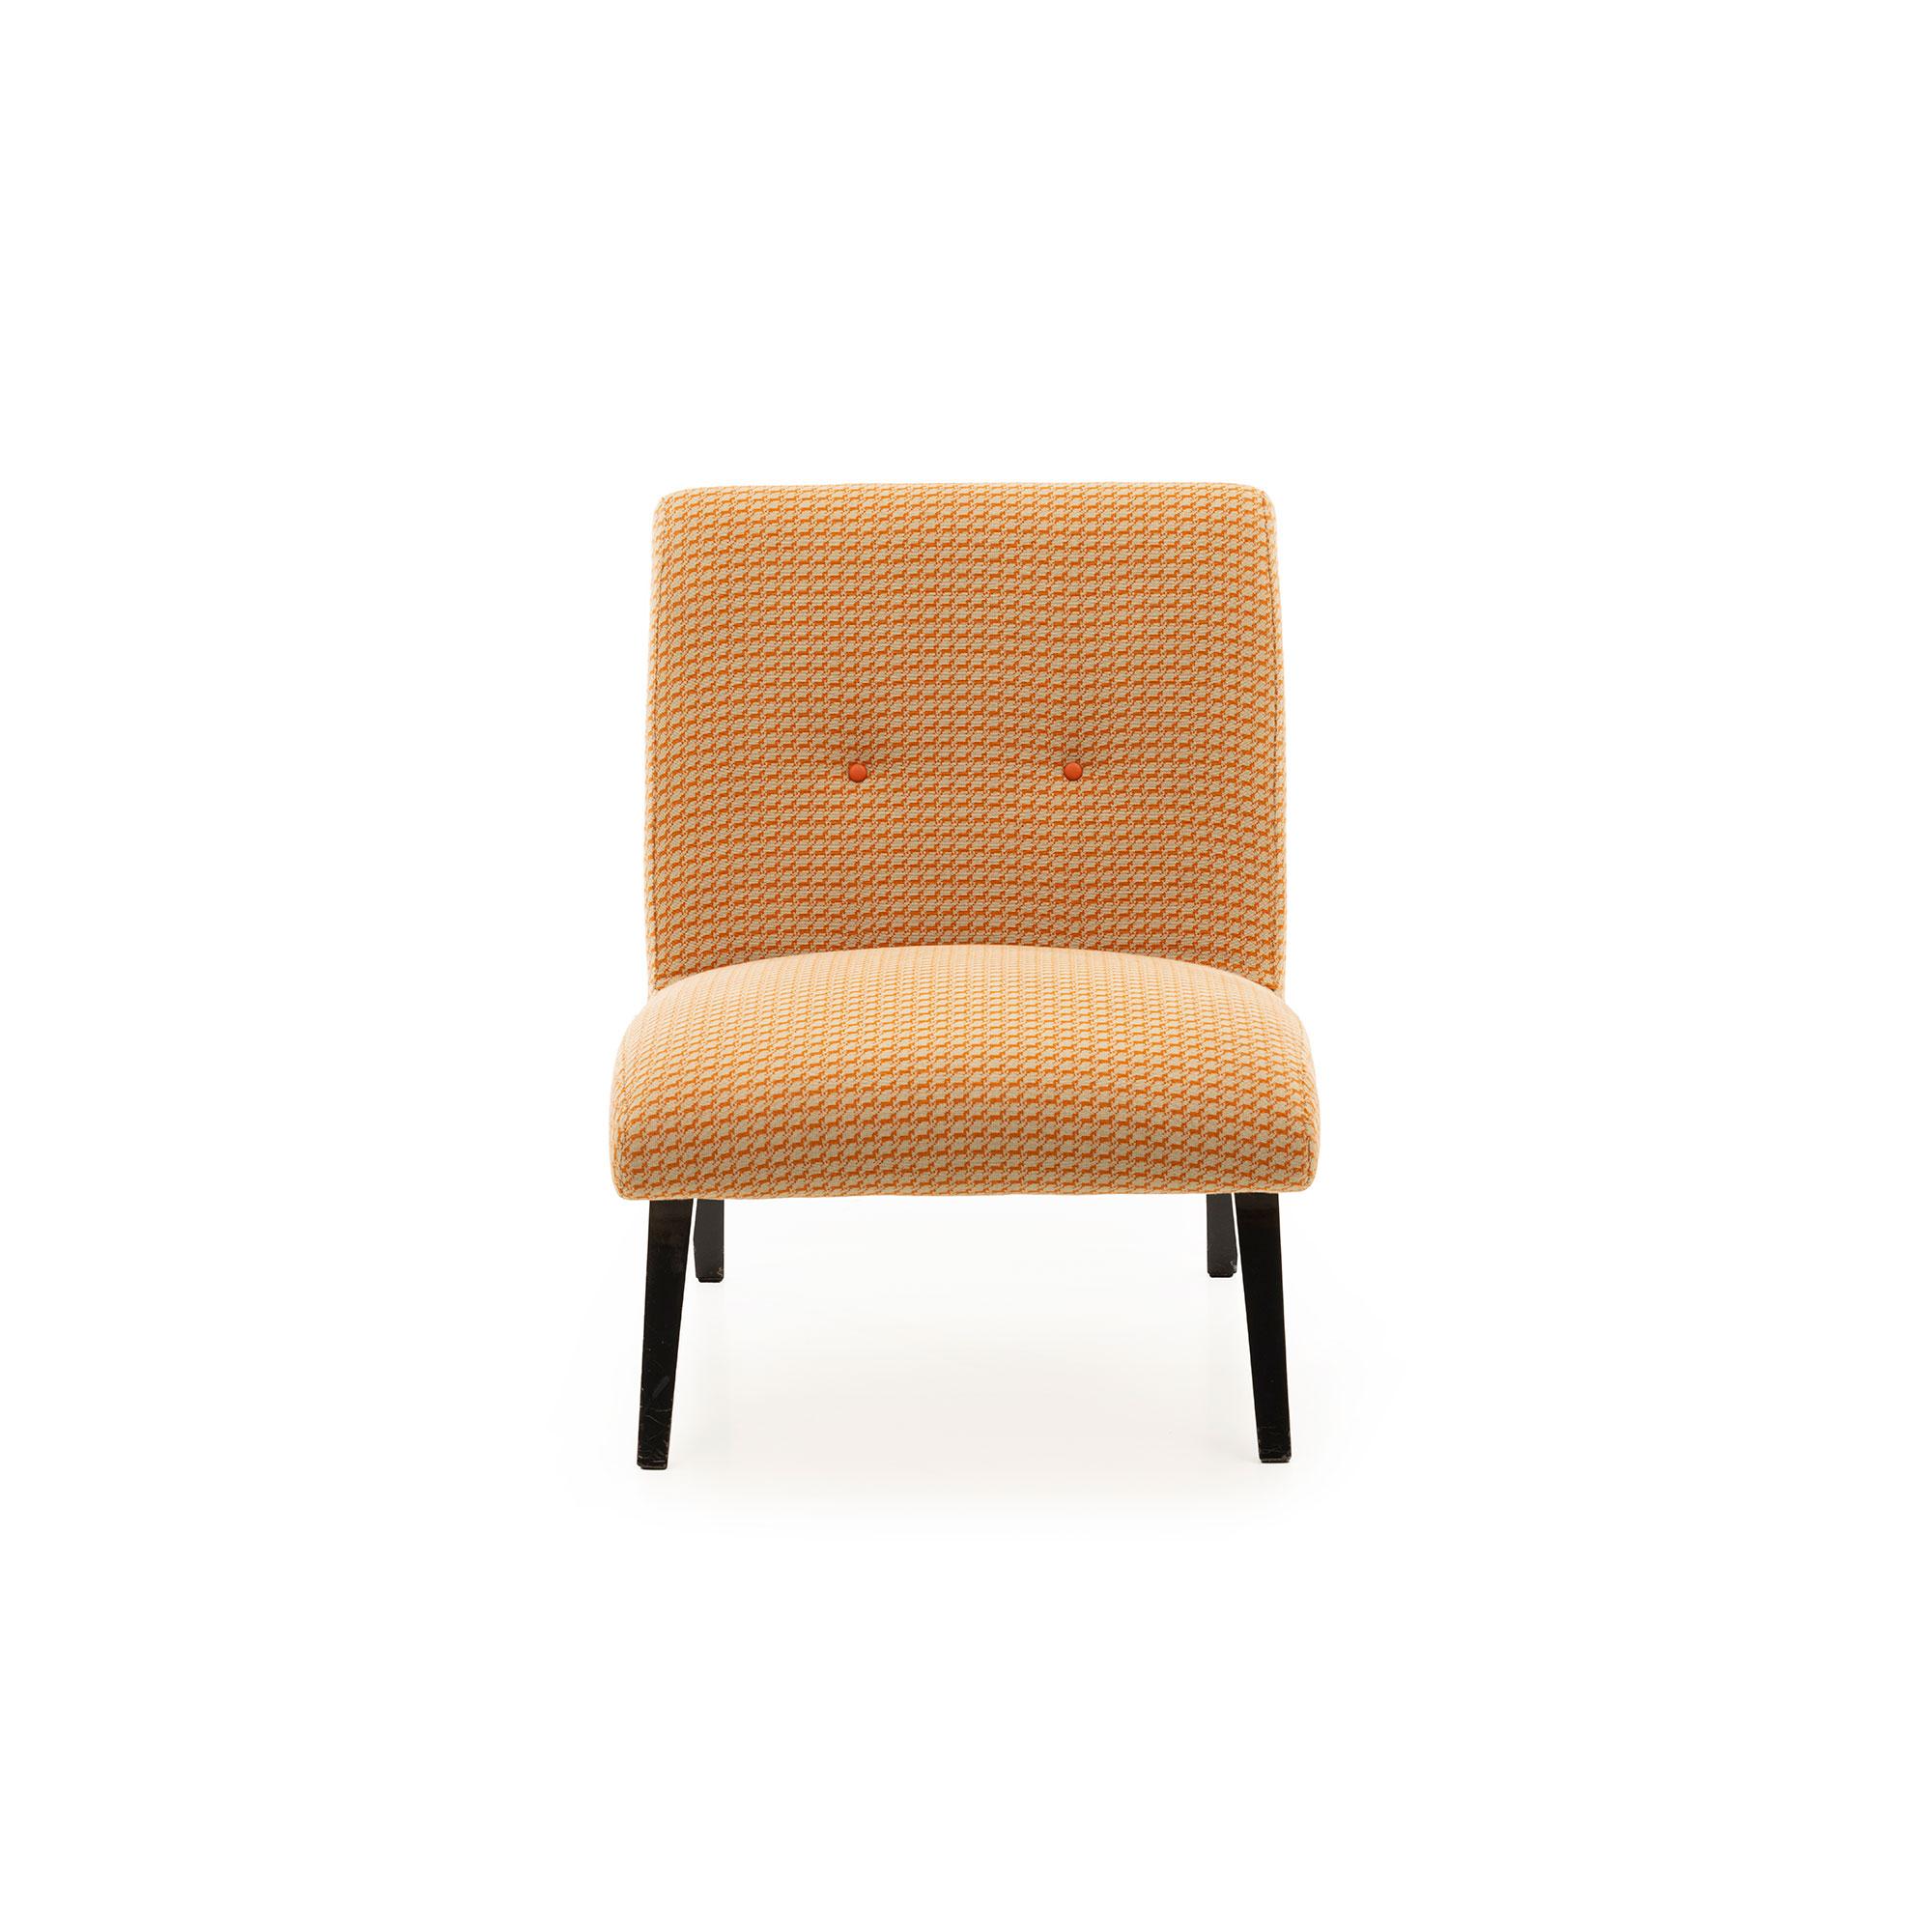 Armchair in solid wood with a semi-gloss finish, upholstered in Hermès fabric.

An original design by the Architecture & Interior Design Studio Ding Dong. The Lynch chair is upholstered in Hèrmes fabric with two buttons in leather.

Comfortable yet